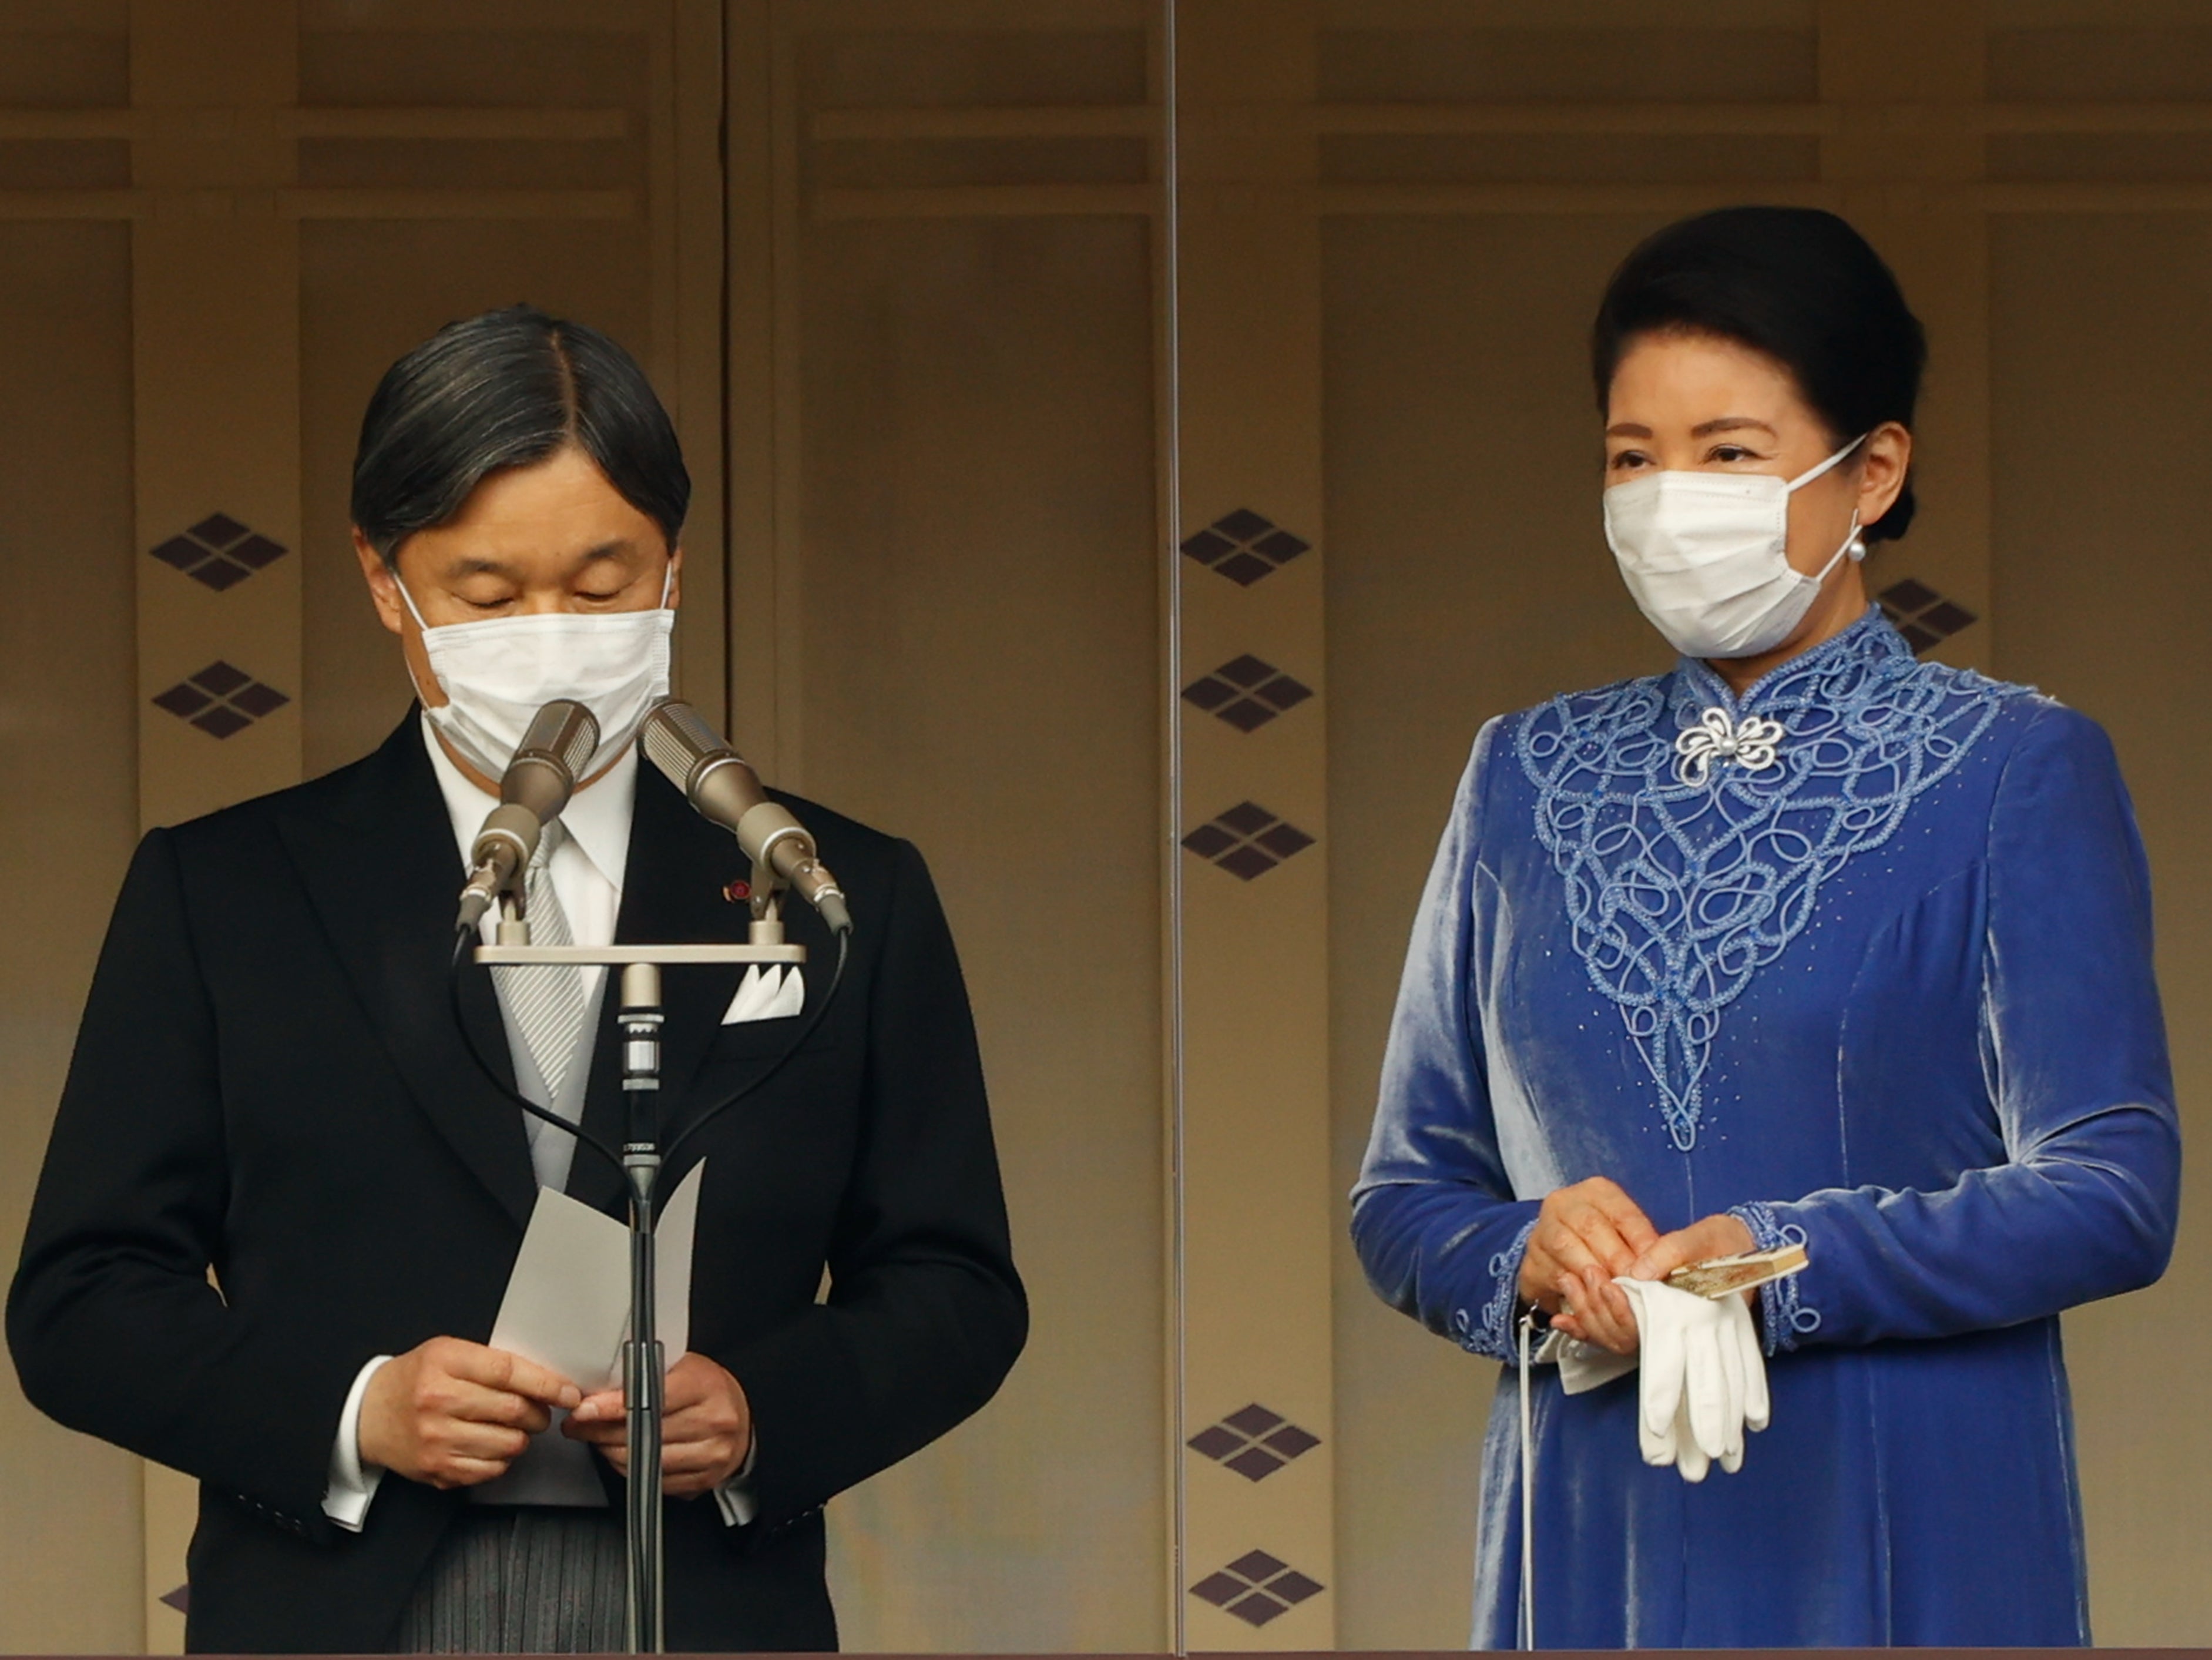 Emperor Naruhito of Japan and his wife Empress Masako greet visitors during his birthday celebration at the Imperial Palace on 23 February 2023 in Tokyo, Japan. The emperor turns 63 this year